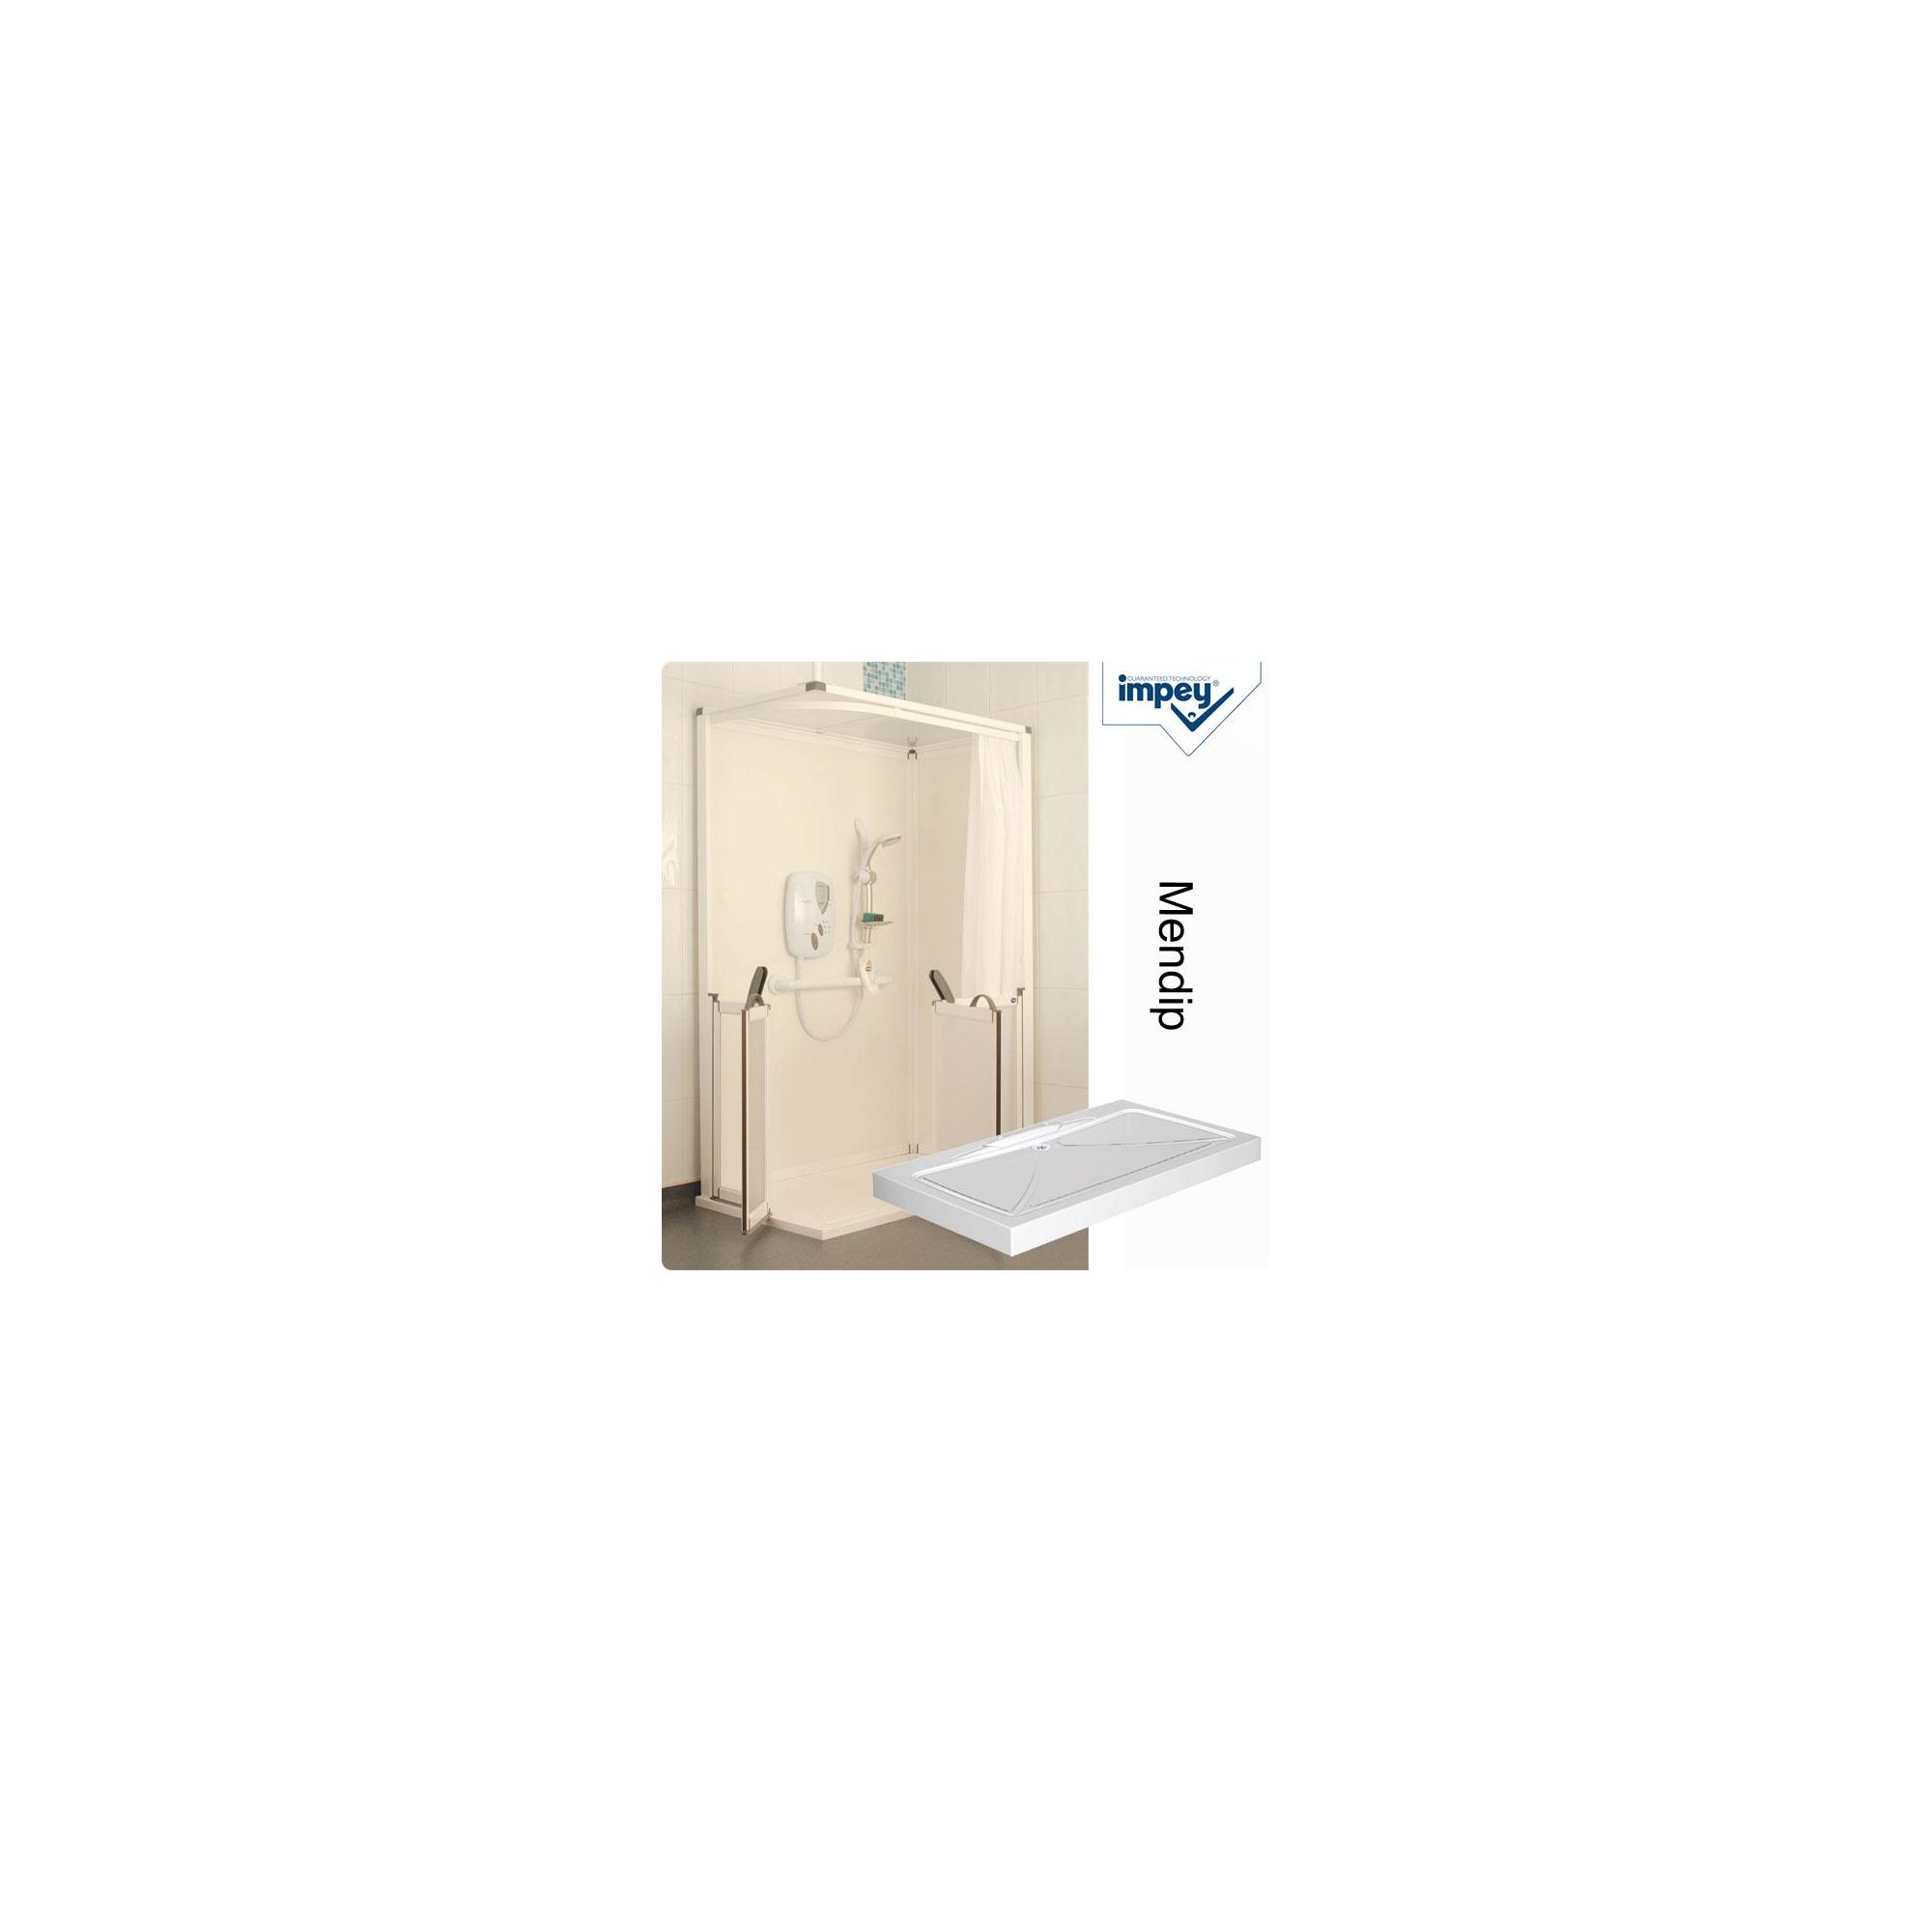 Impey Impress Swift-Fit Shower Cubicle with Mendip Shower Tray at Tesco Direct